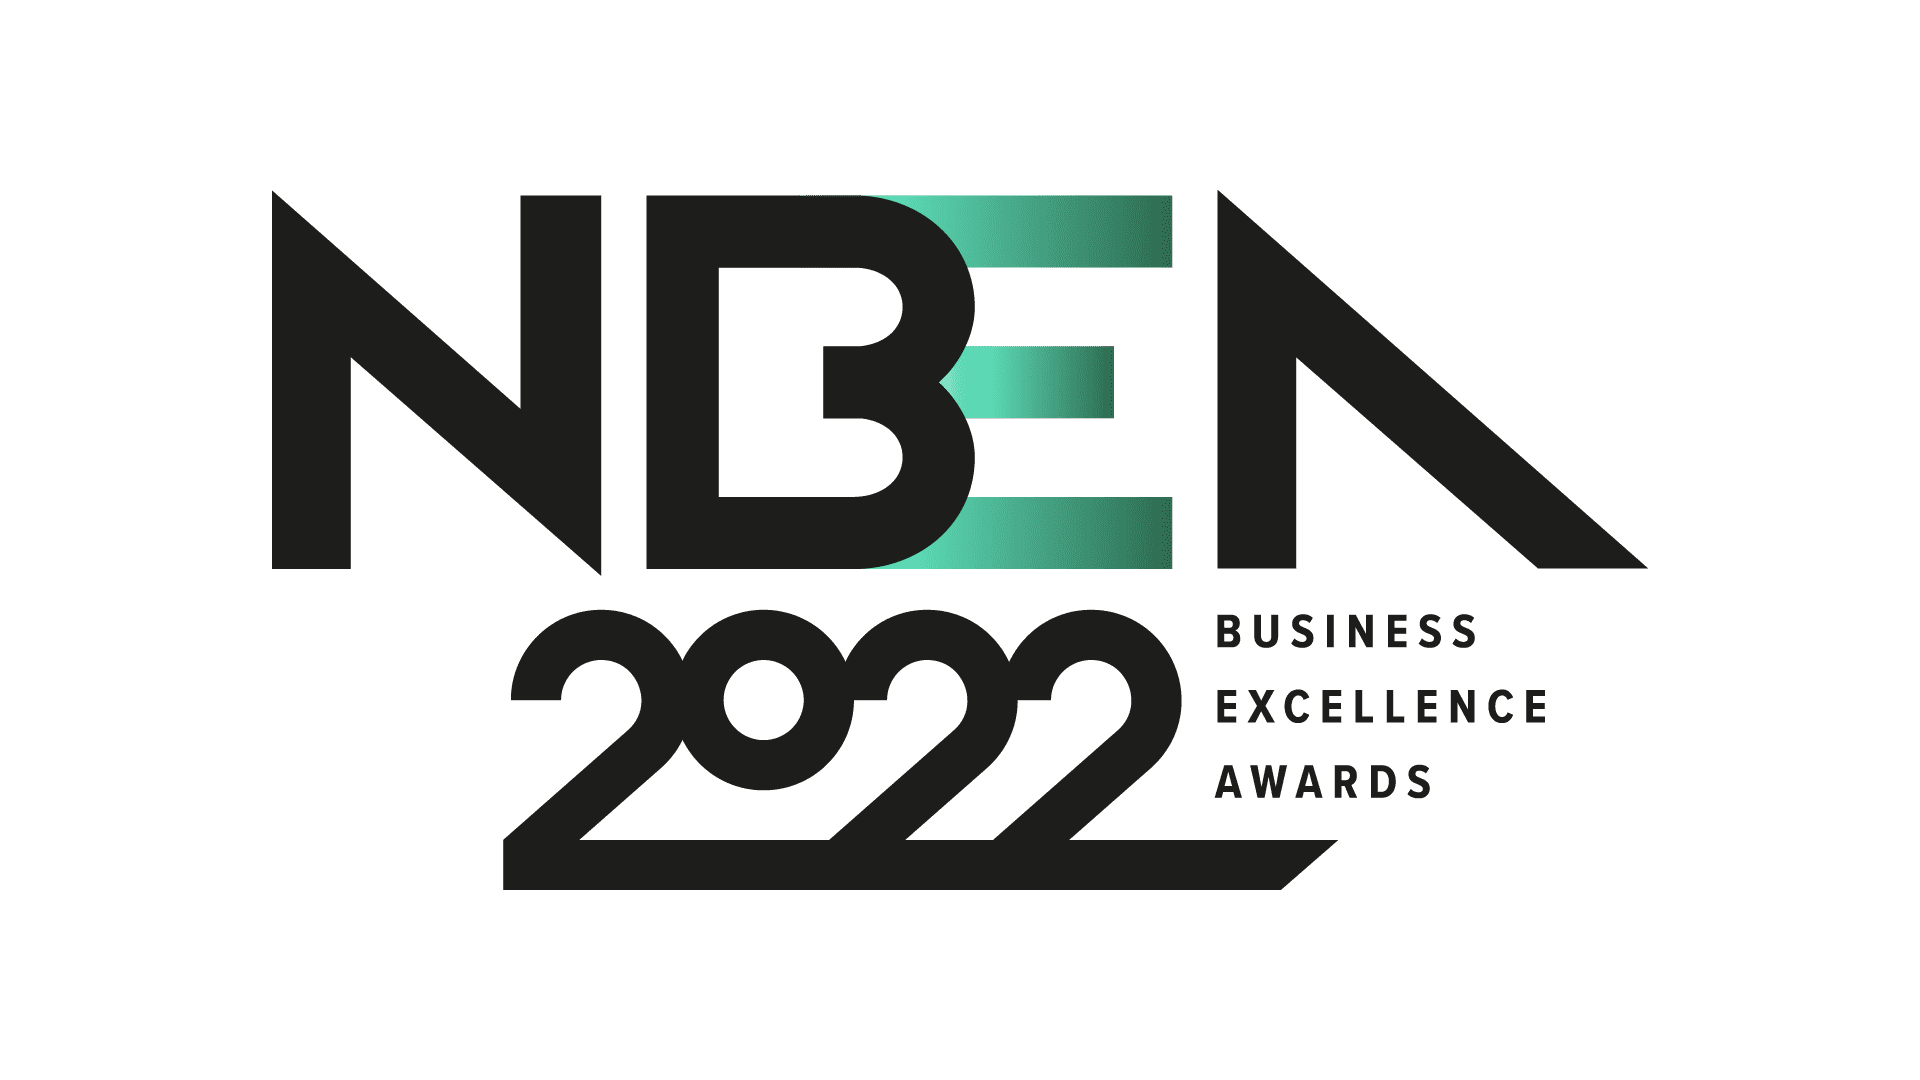 NBEA Awards Business of the Year 2022